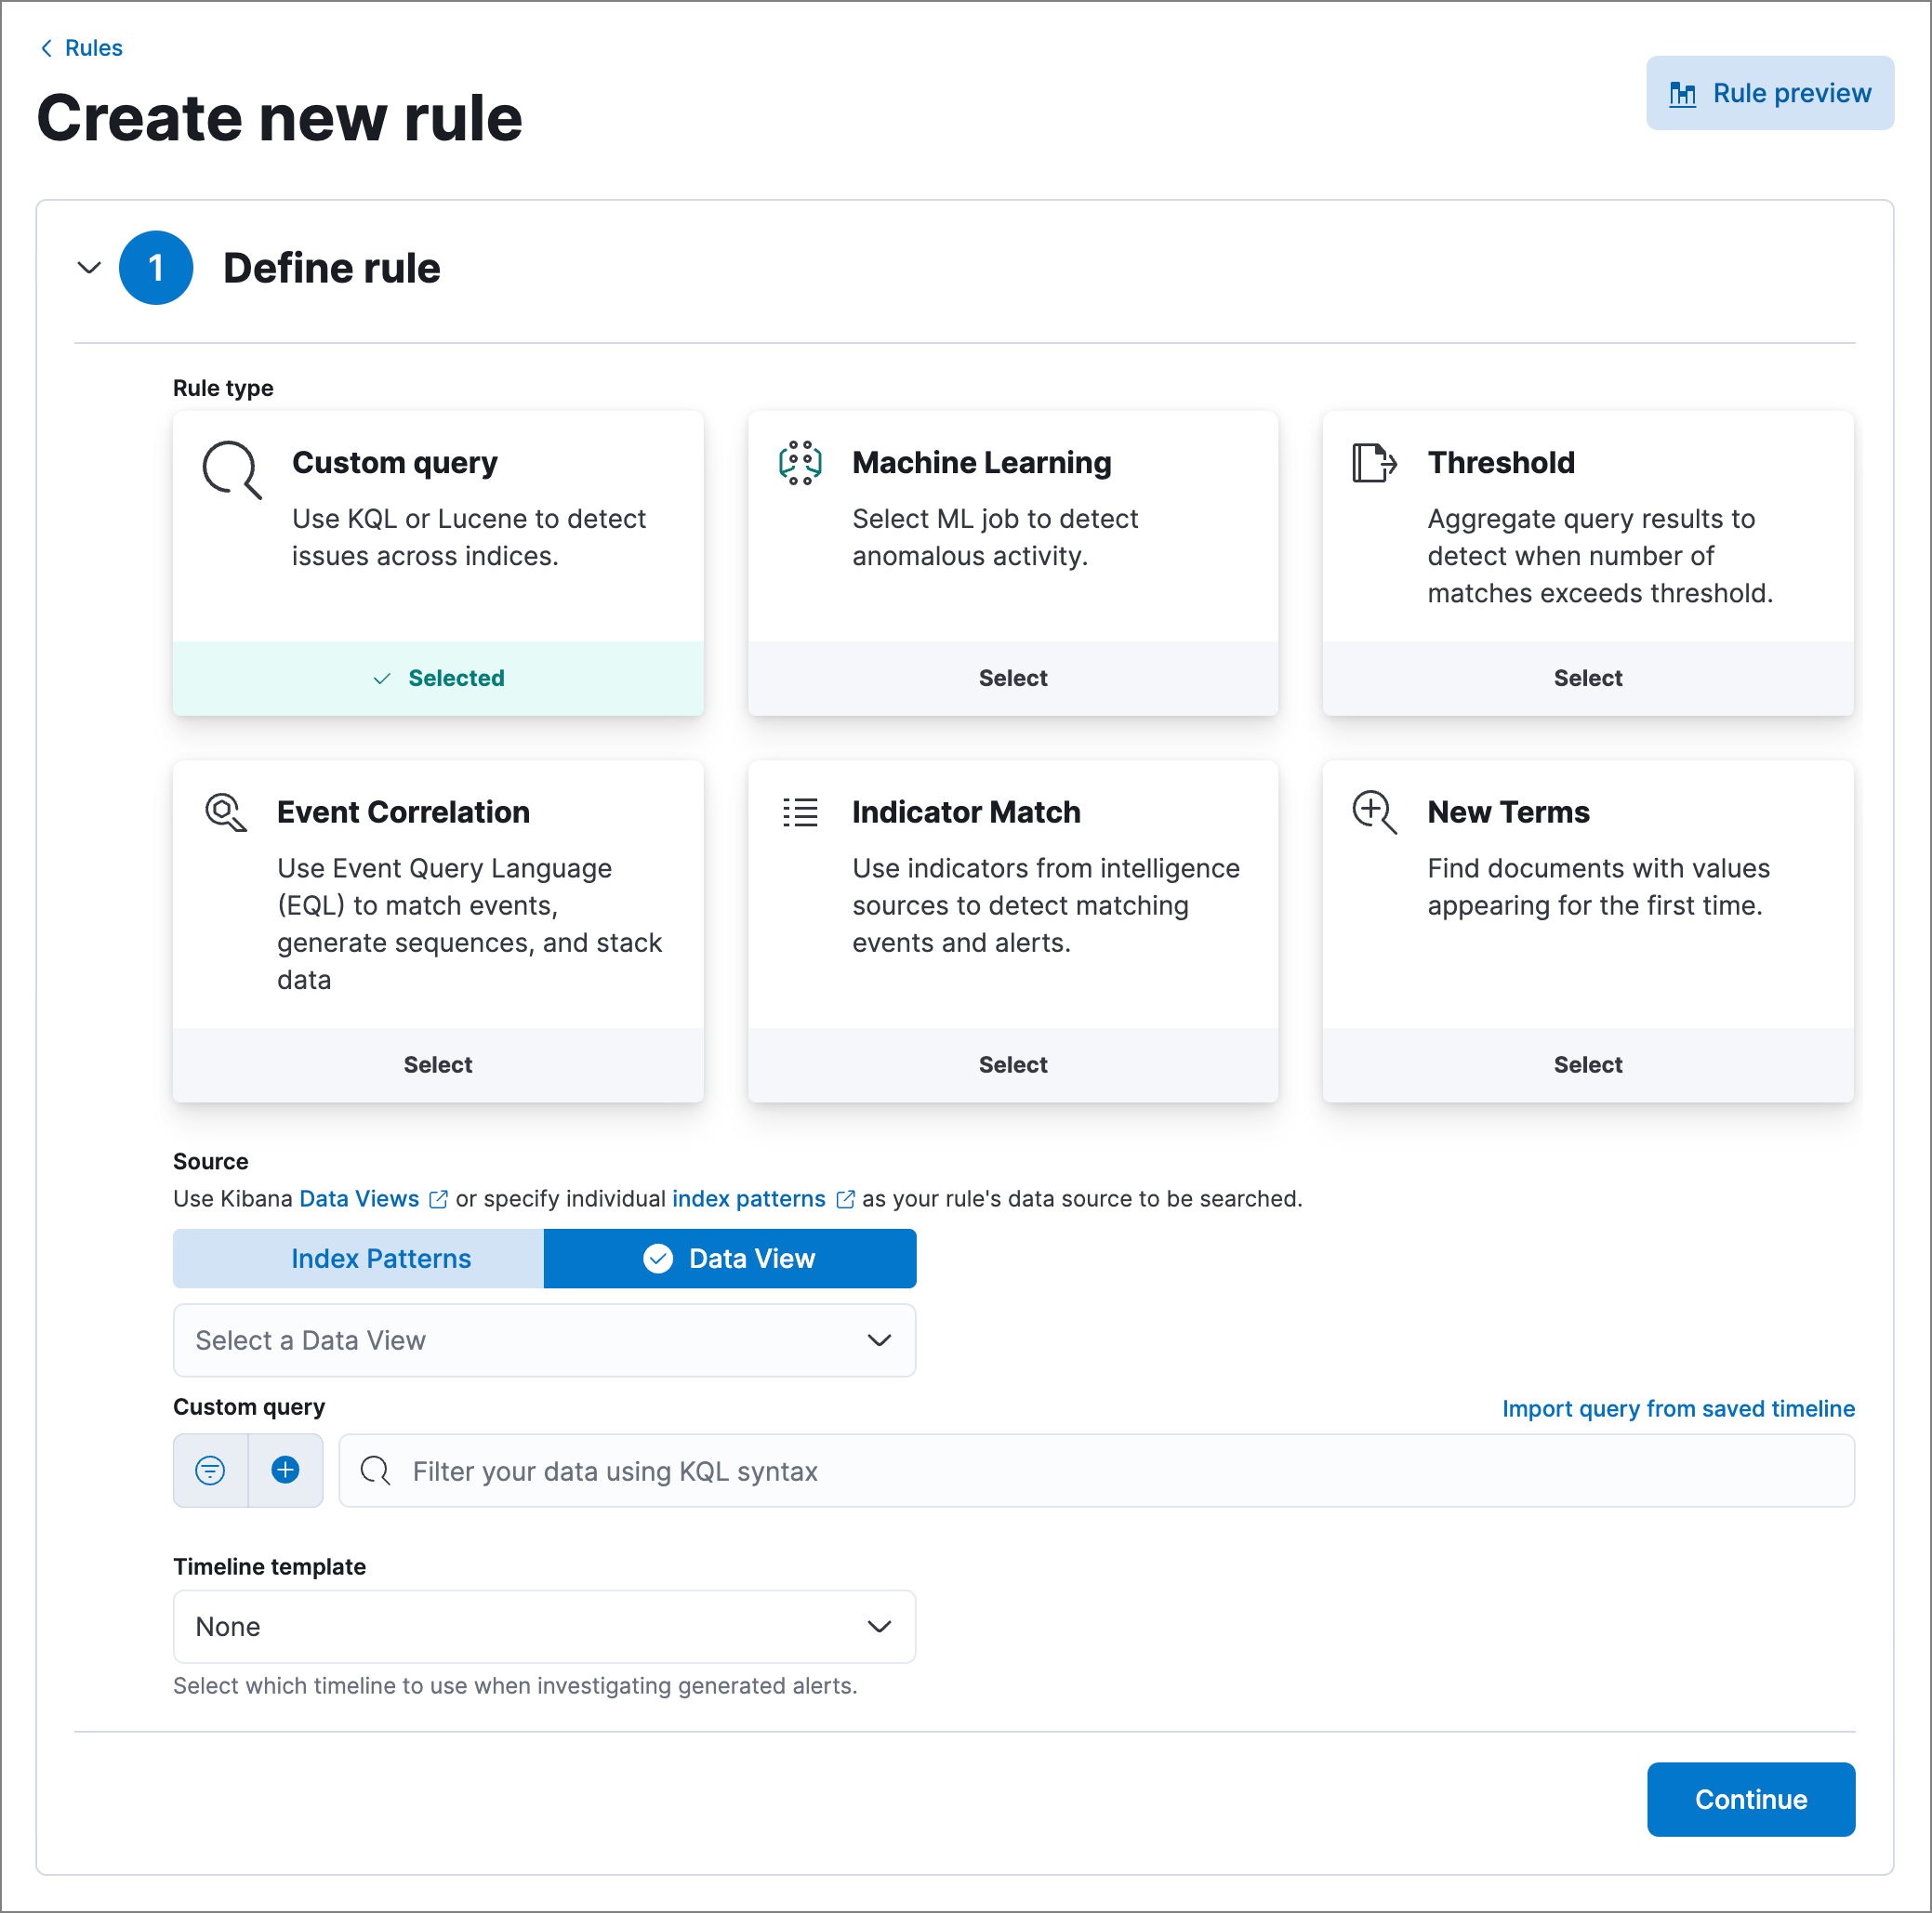 Create new rule page